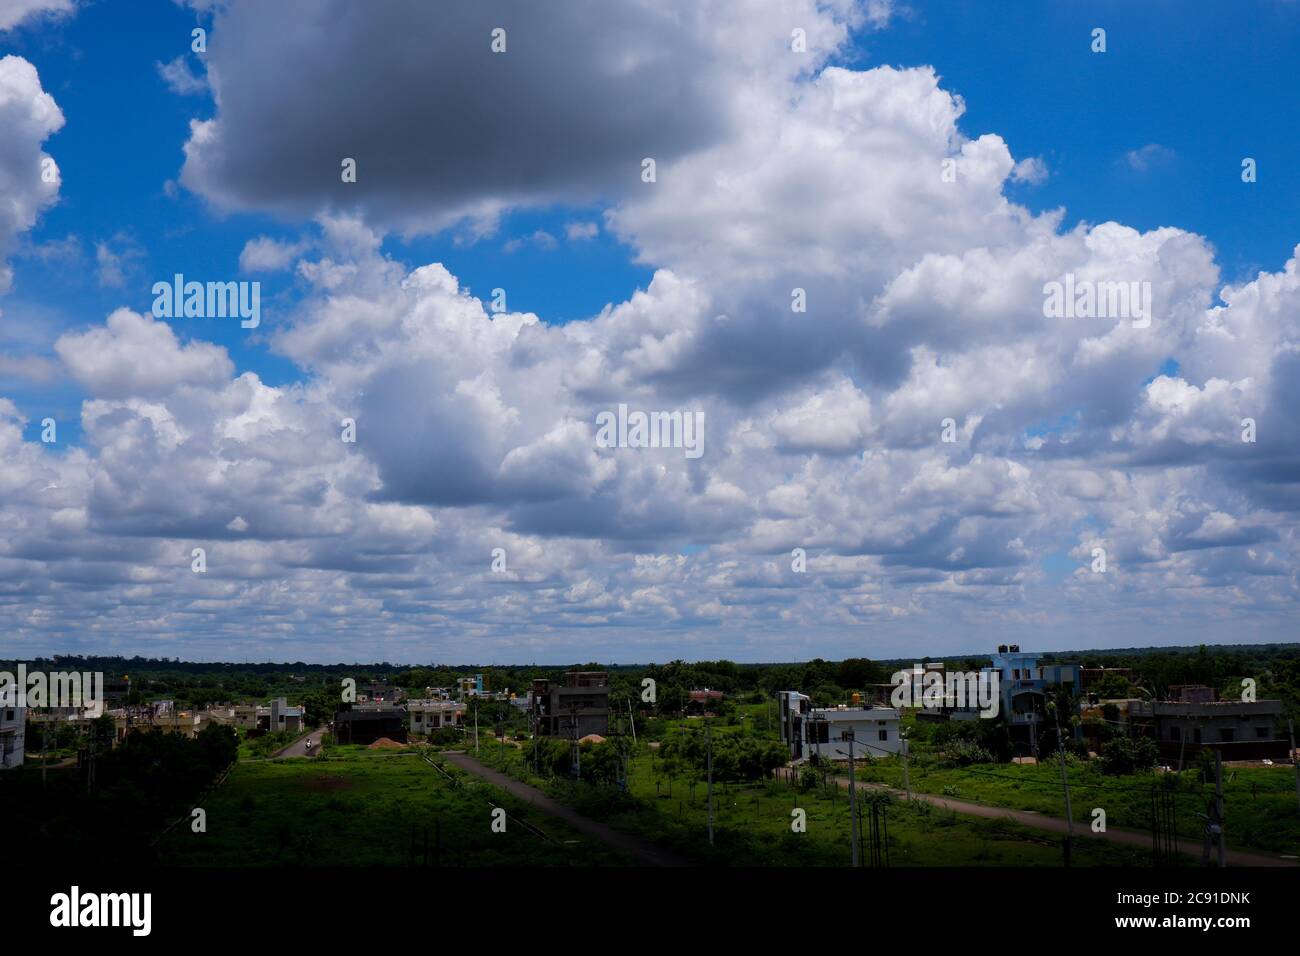 a shot of cityscape in sunny day Stock Photo